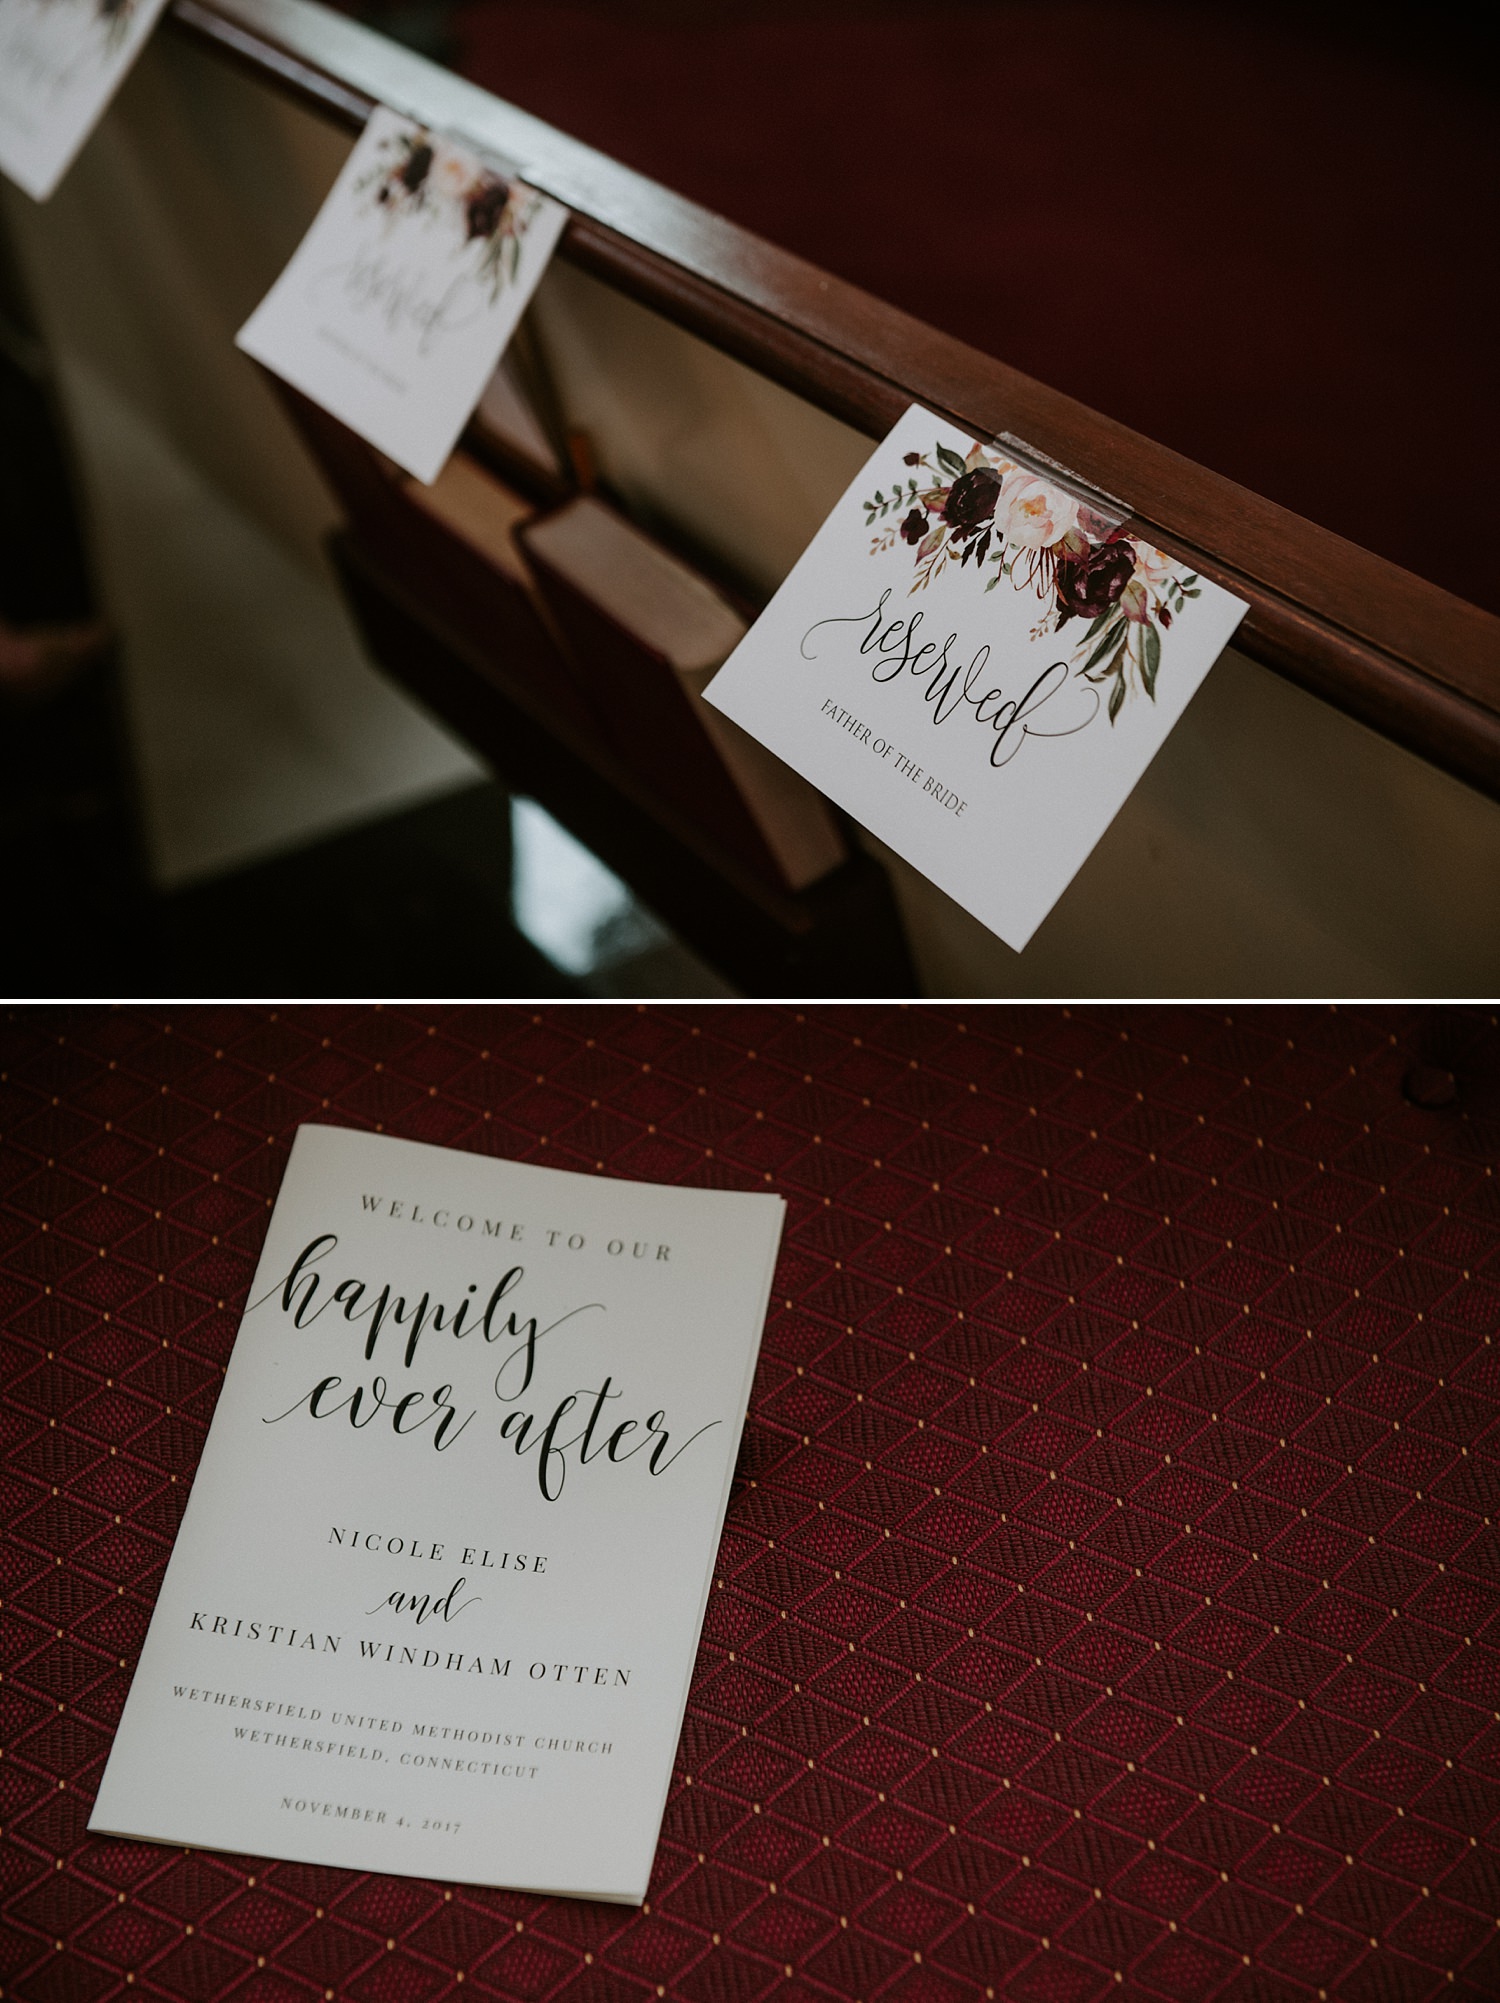 Happily Ever After wedding program & wedding ceremony reserved signs